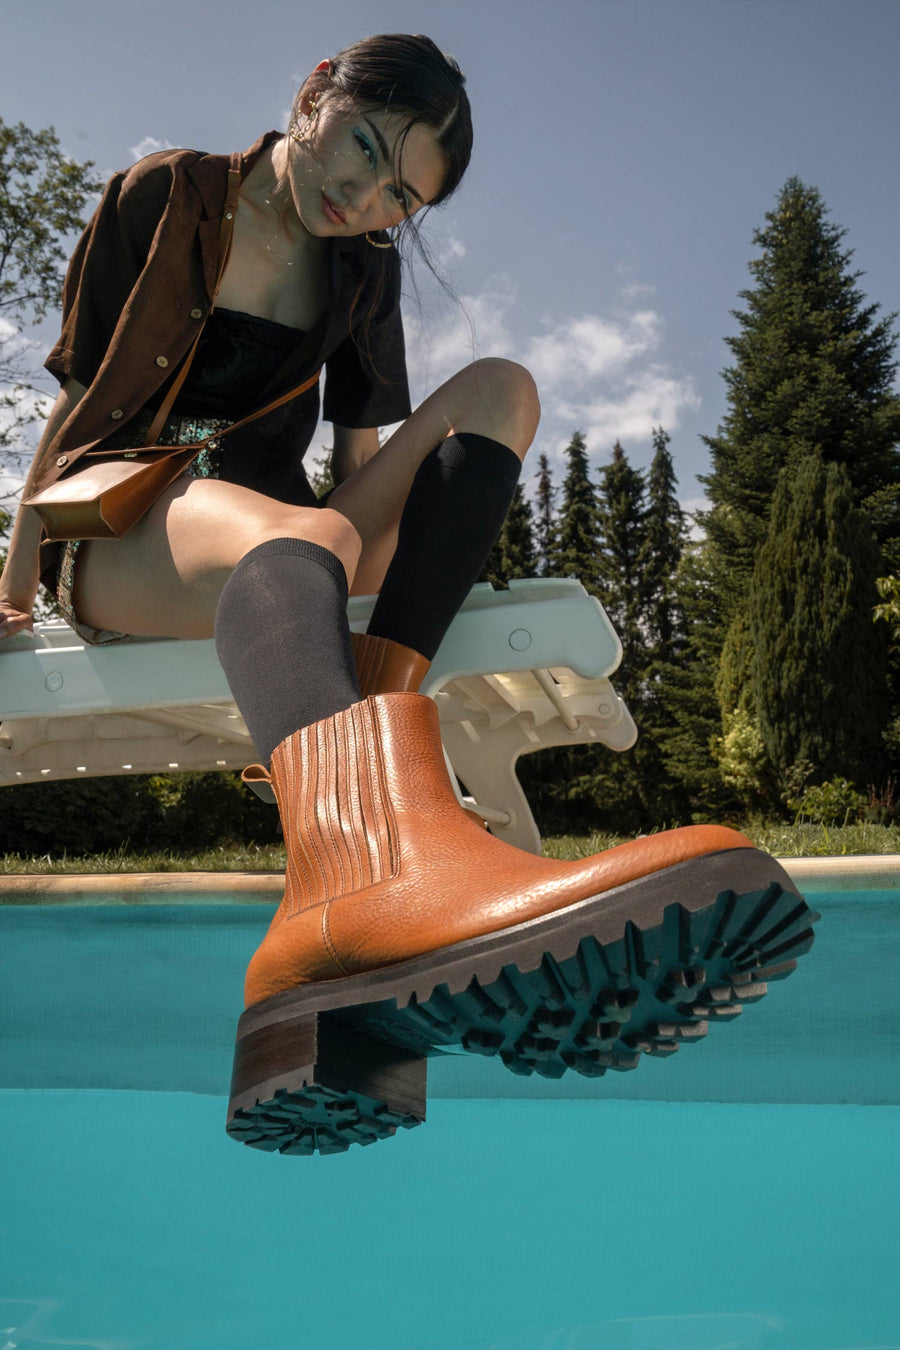 Sustainable, goodyear-welted leather boot made from vegetable tanned leather. Made in Spain.